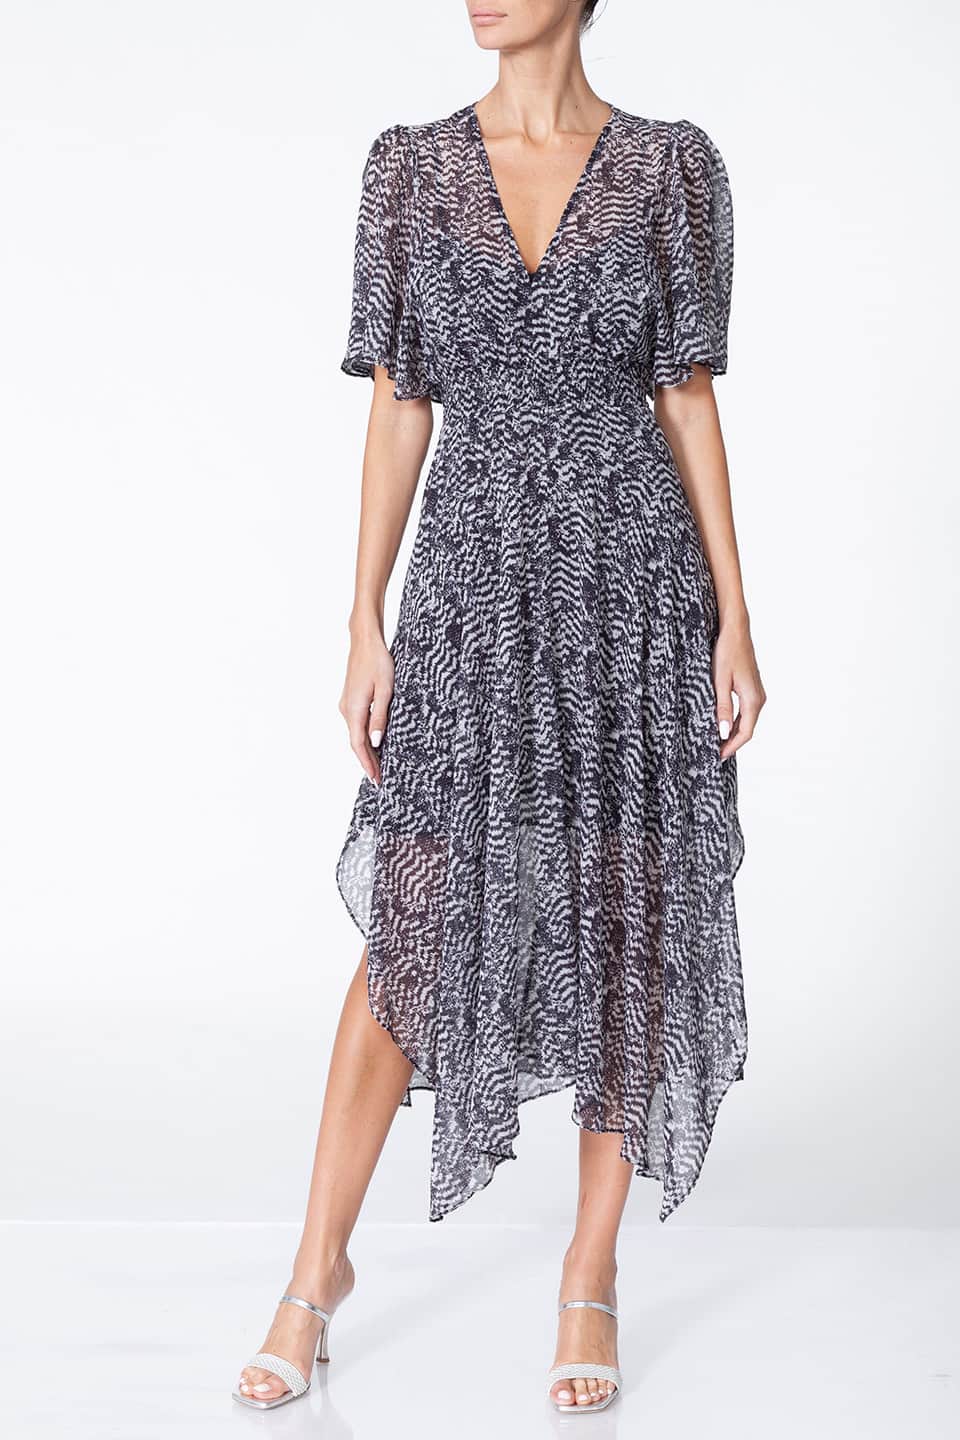 Striped midi dress from fashion designer to shop online in UAE. Product gallery 1